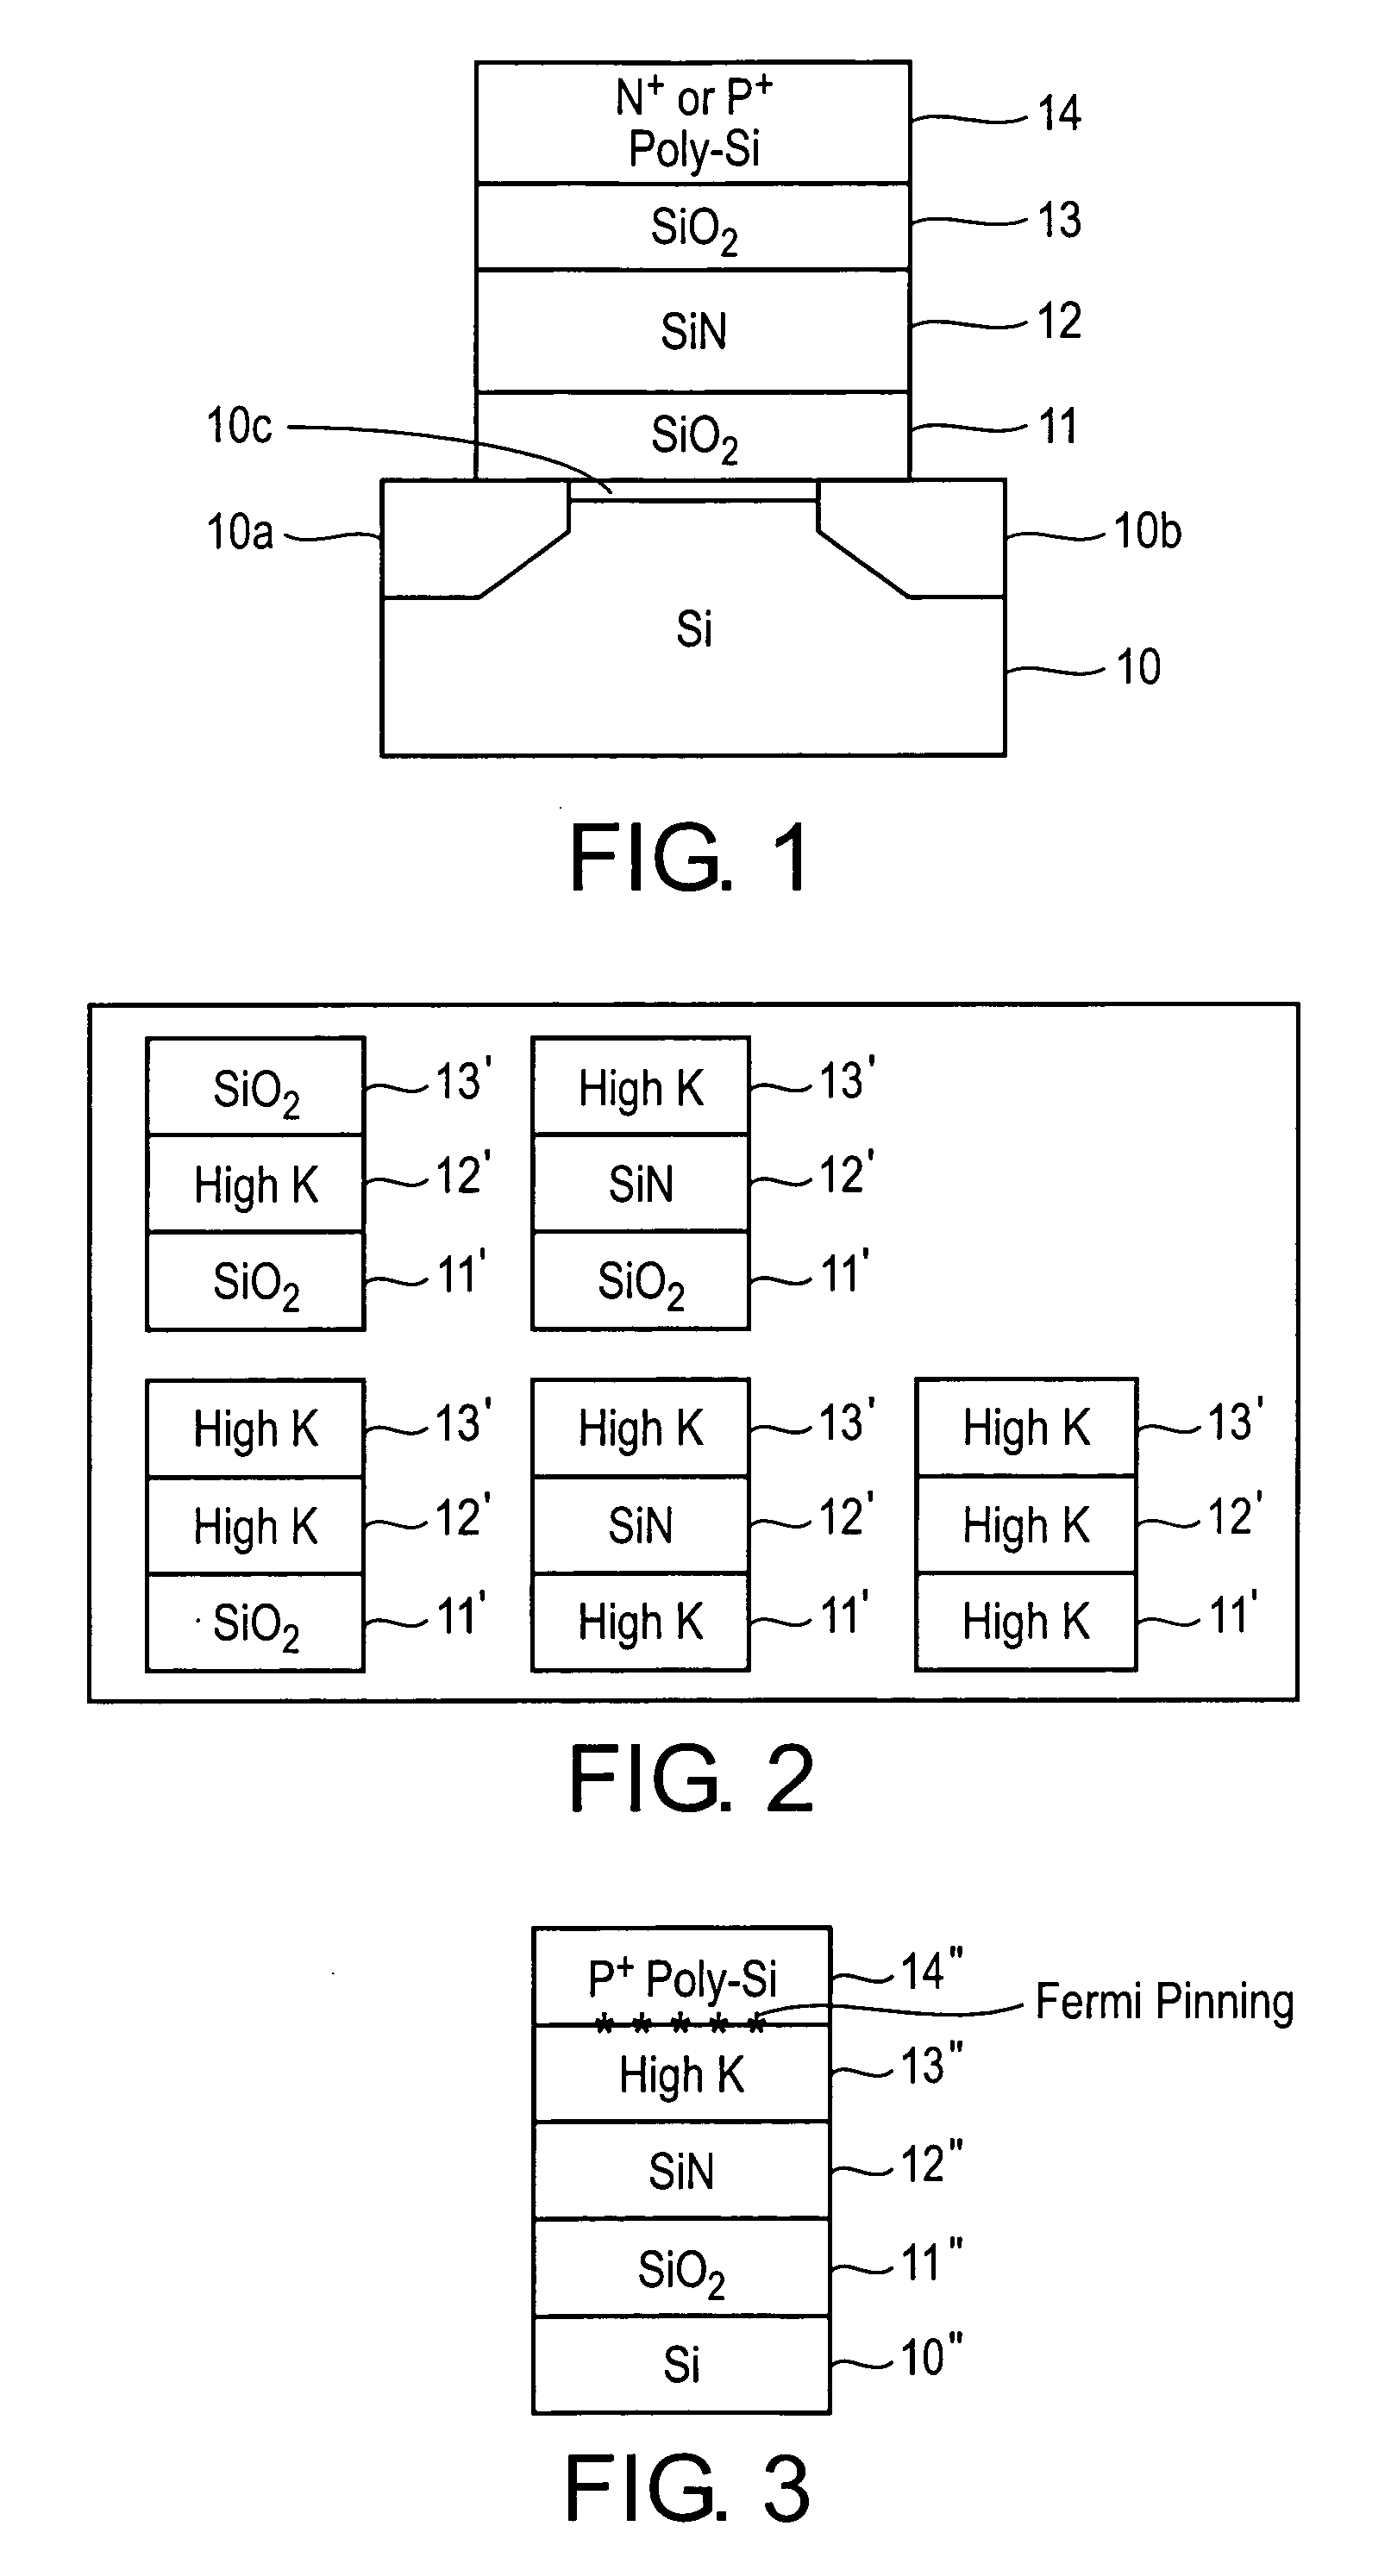 Non-volatile semiconductor memory device with alternative metal gate material